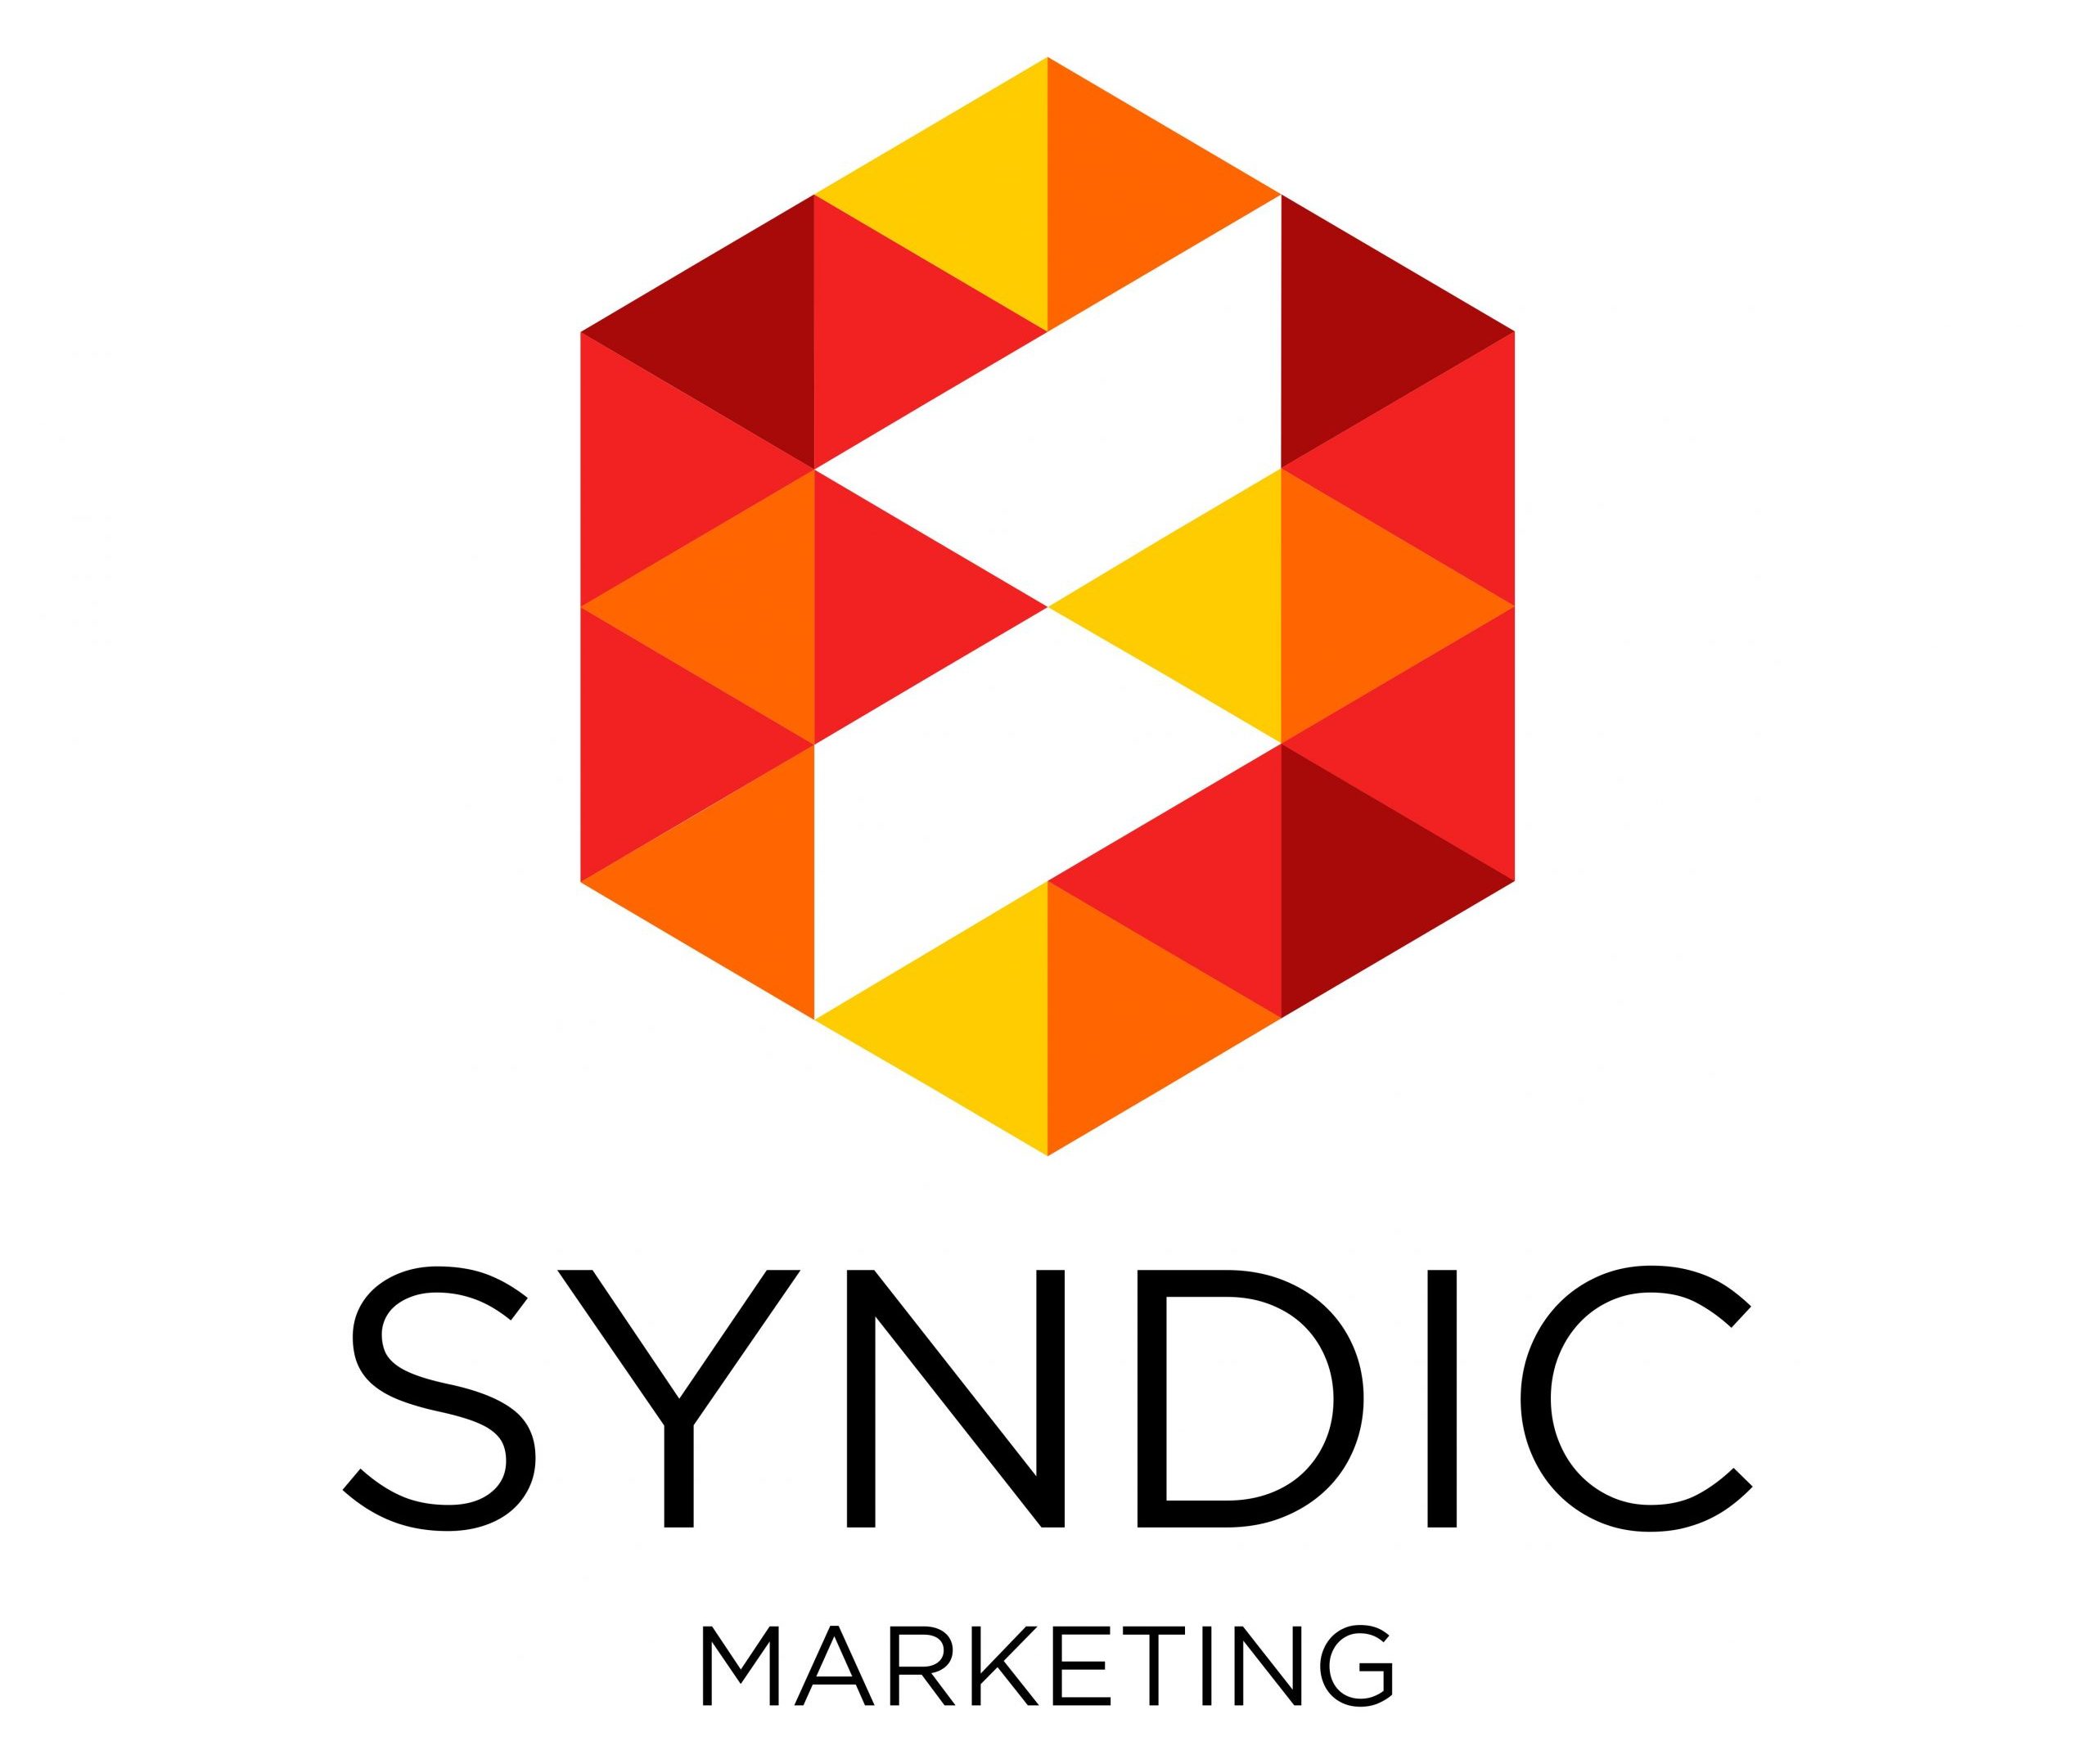 Syndic Inc coupon codes, promo codes and deals